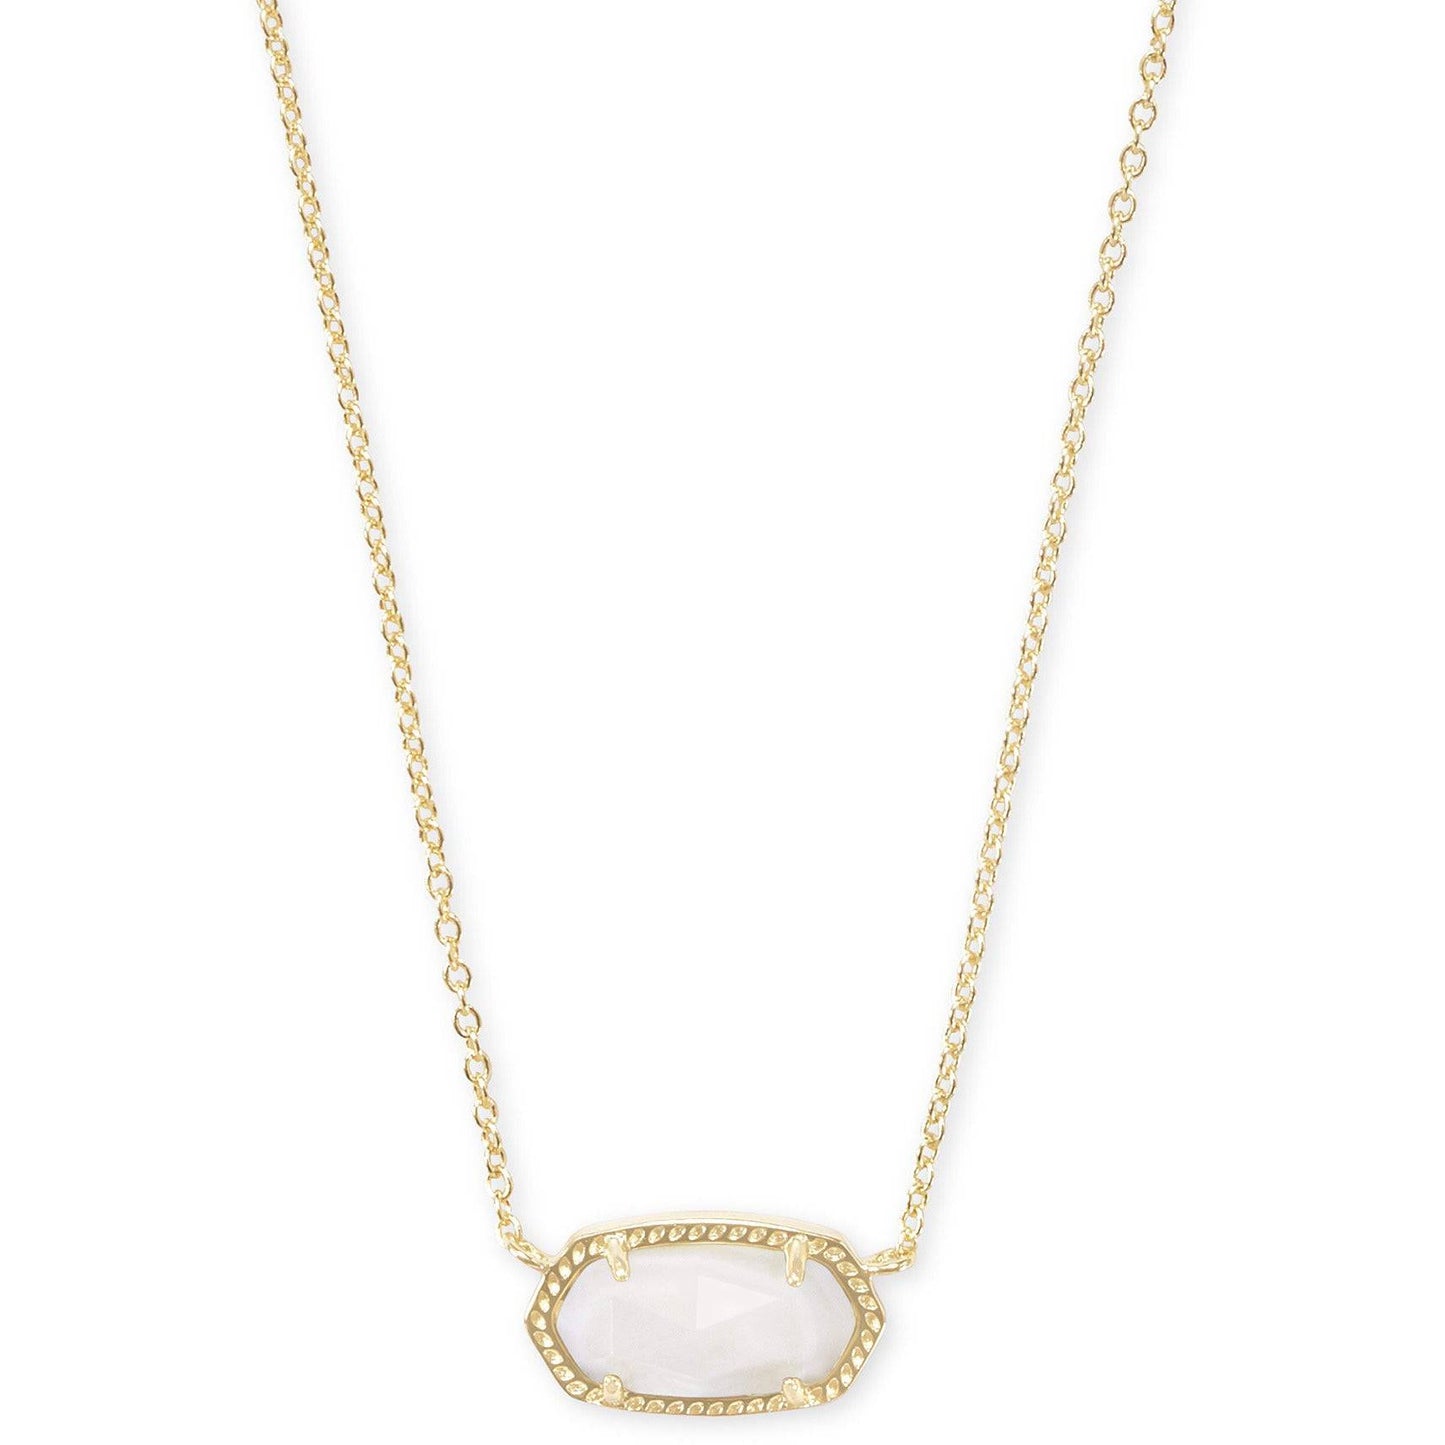 Kendra Scott - Elisa Gold Pendant Necklace in White Mother-of-Pearl - Findlay Rowe Designs